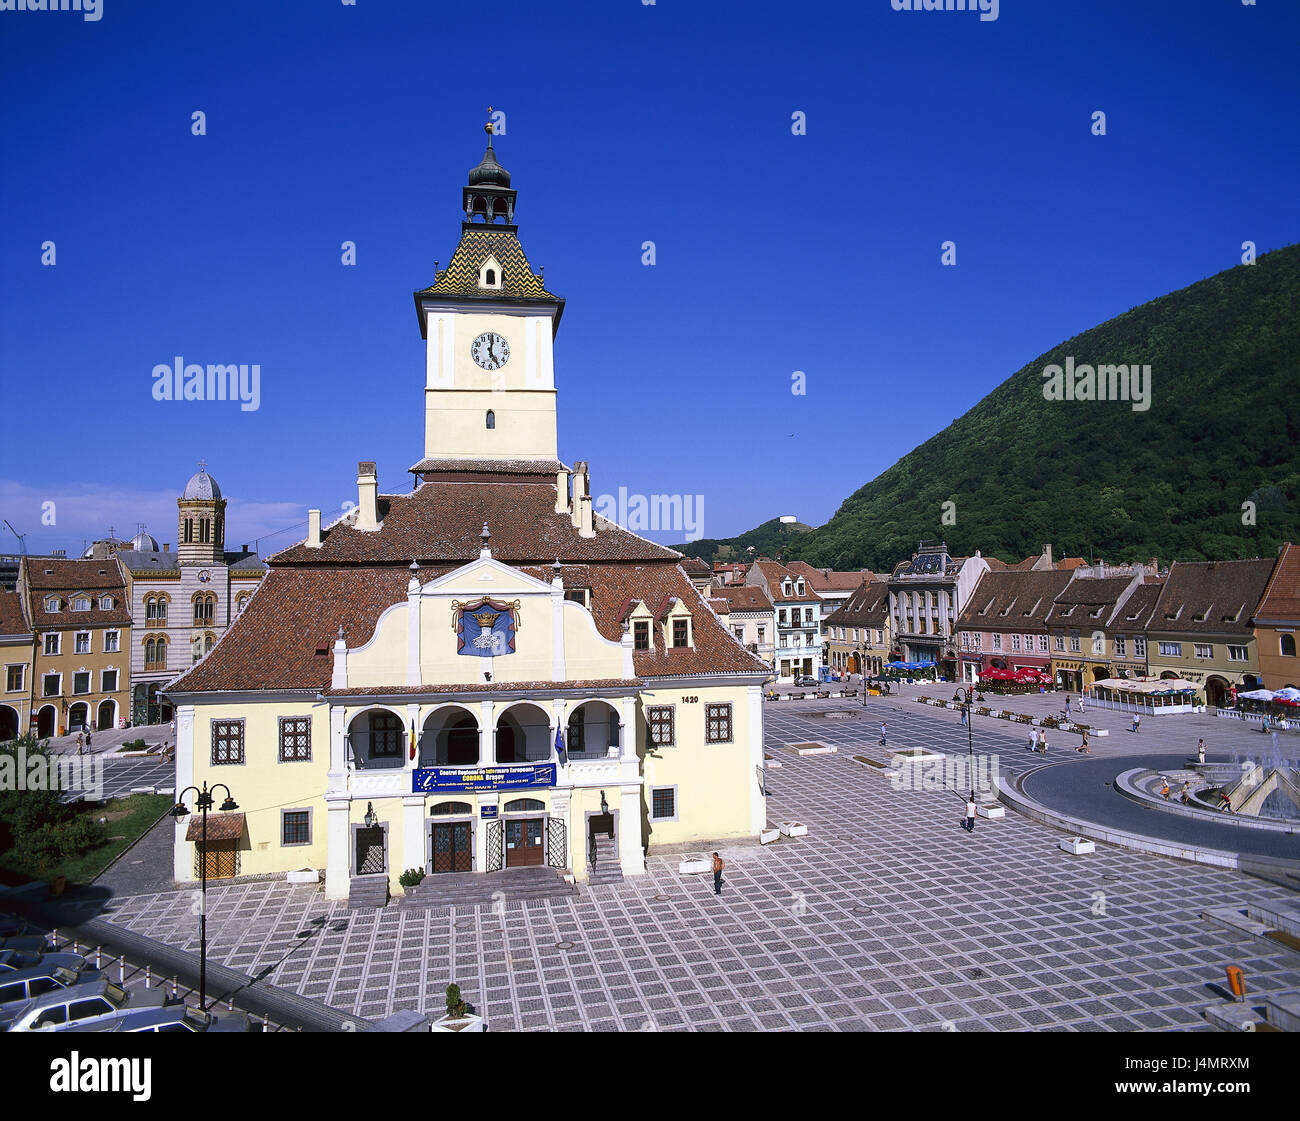 Romania, Brasov, Piata Sfatului, city hall, in 1420 Southeast Europe, the Balkans, south cirque godfather, Kronstadt, town, houses, marketplace, city hall building, Primaria, building, structure, architecture, place of interest Stock Photo